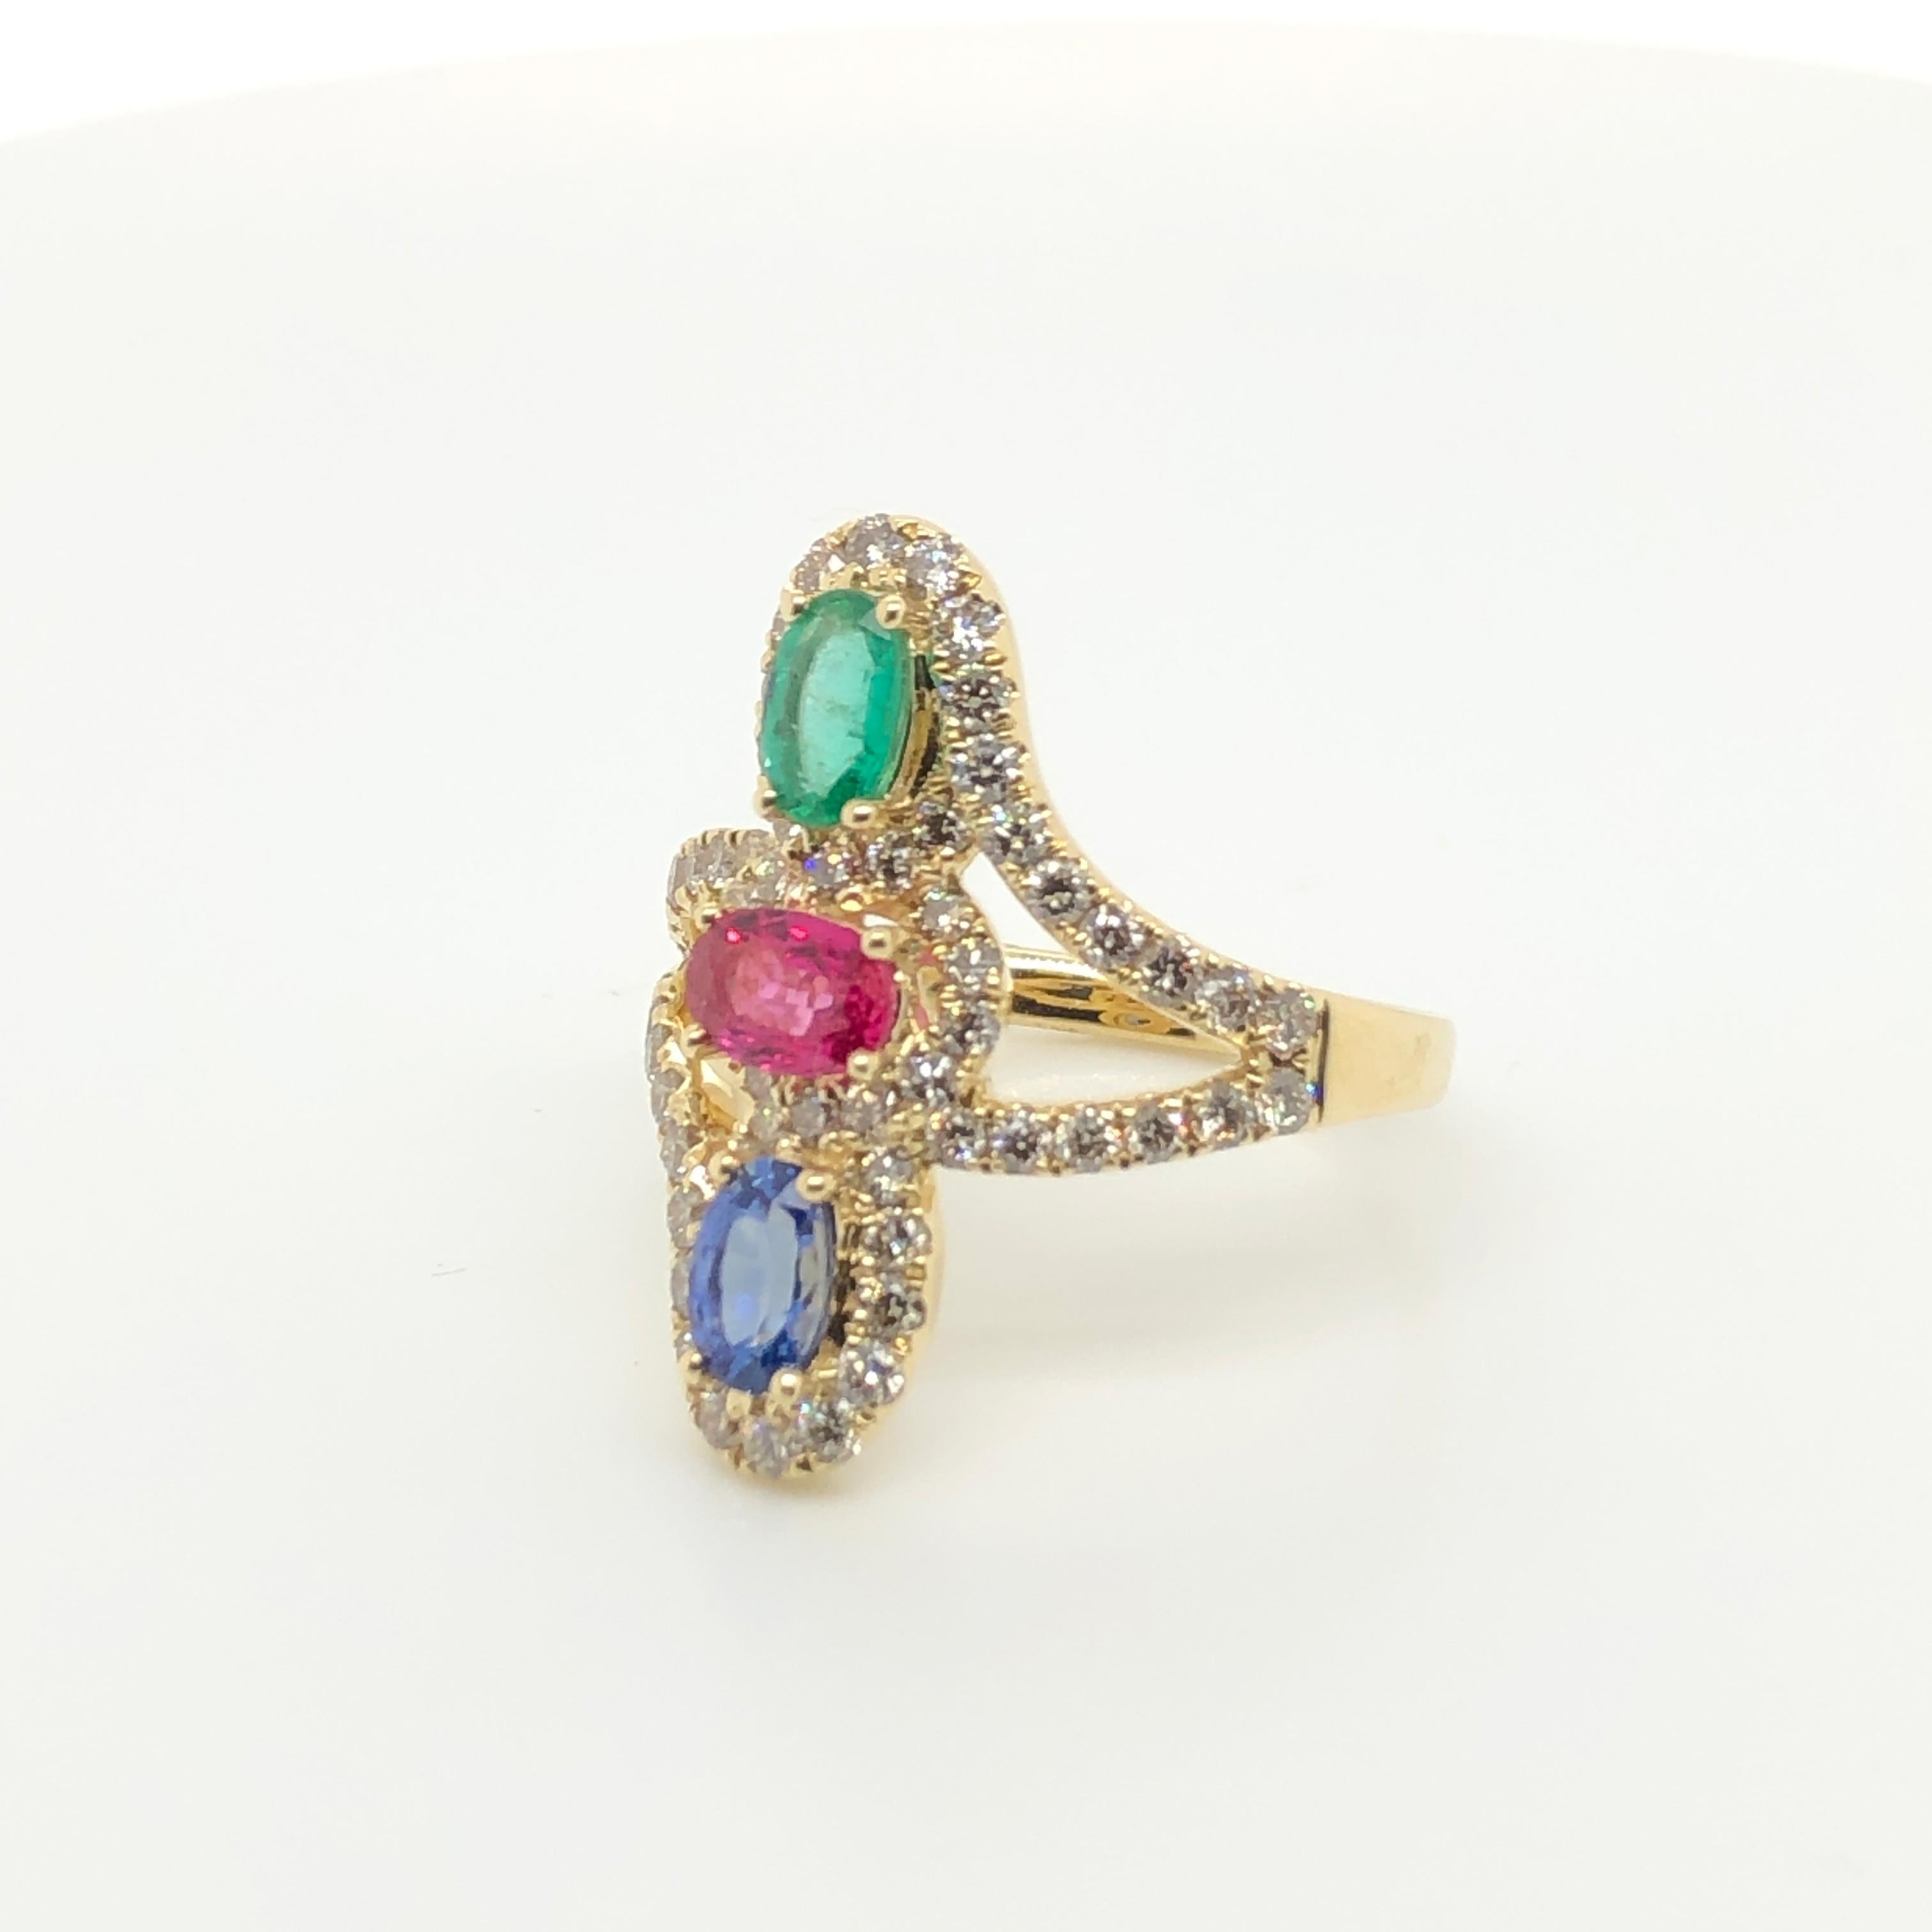 This three-stone ring from Le Vian features a precious combination of oval-cut gems - a 1/2 ct. Ruby,  a 3/8 ct Blue Sapphire and 1/3 ct Emerald - each surrounded with 1 carat of Crème Brulee Diamonds in a 14k yellow gold north/south setting.
Ring